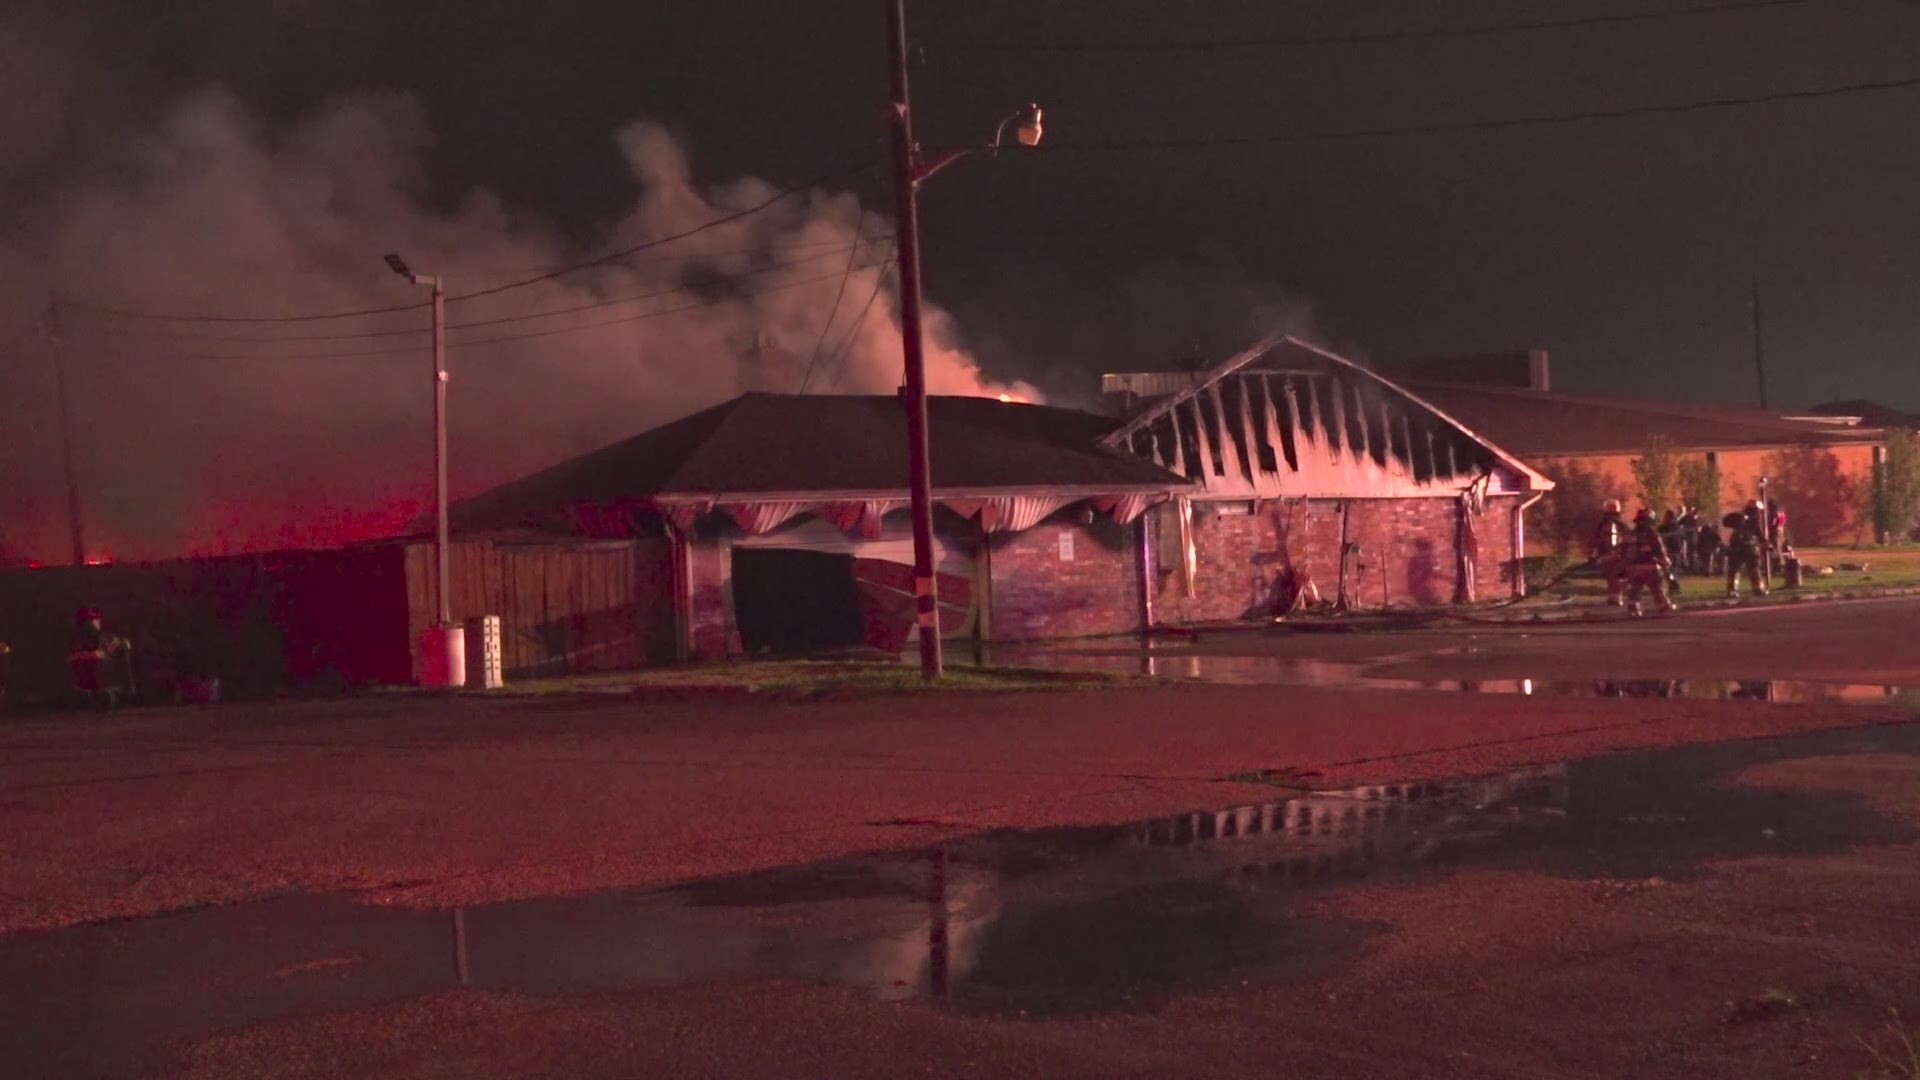 A building fire broke out early Wednesday at the St. Dominic Catholic Church in the Sheldon area, according to the Harris County Fire Marshal's Office.